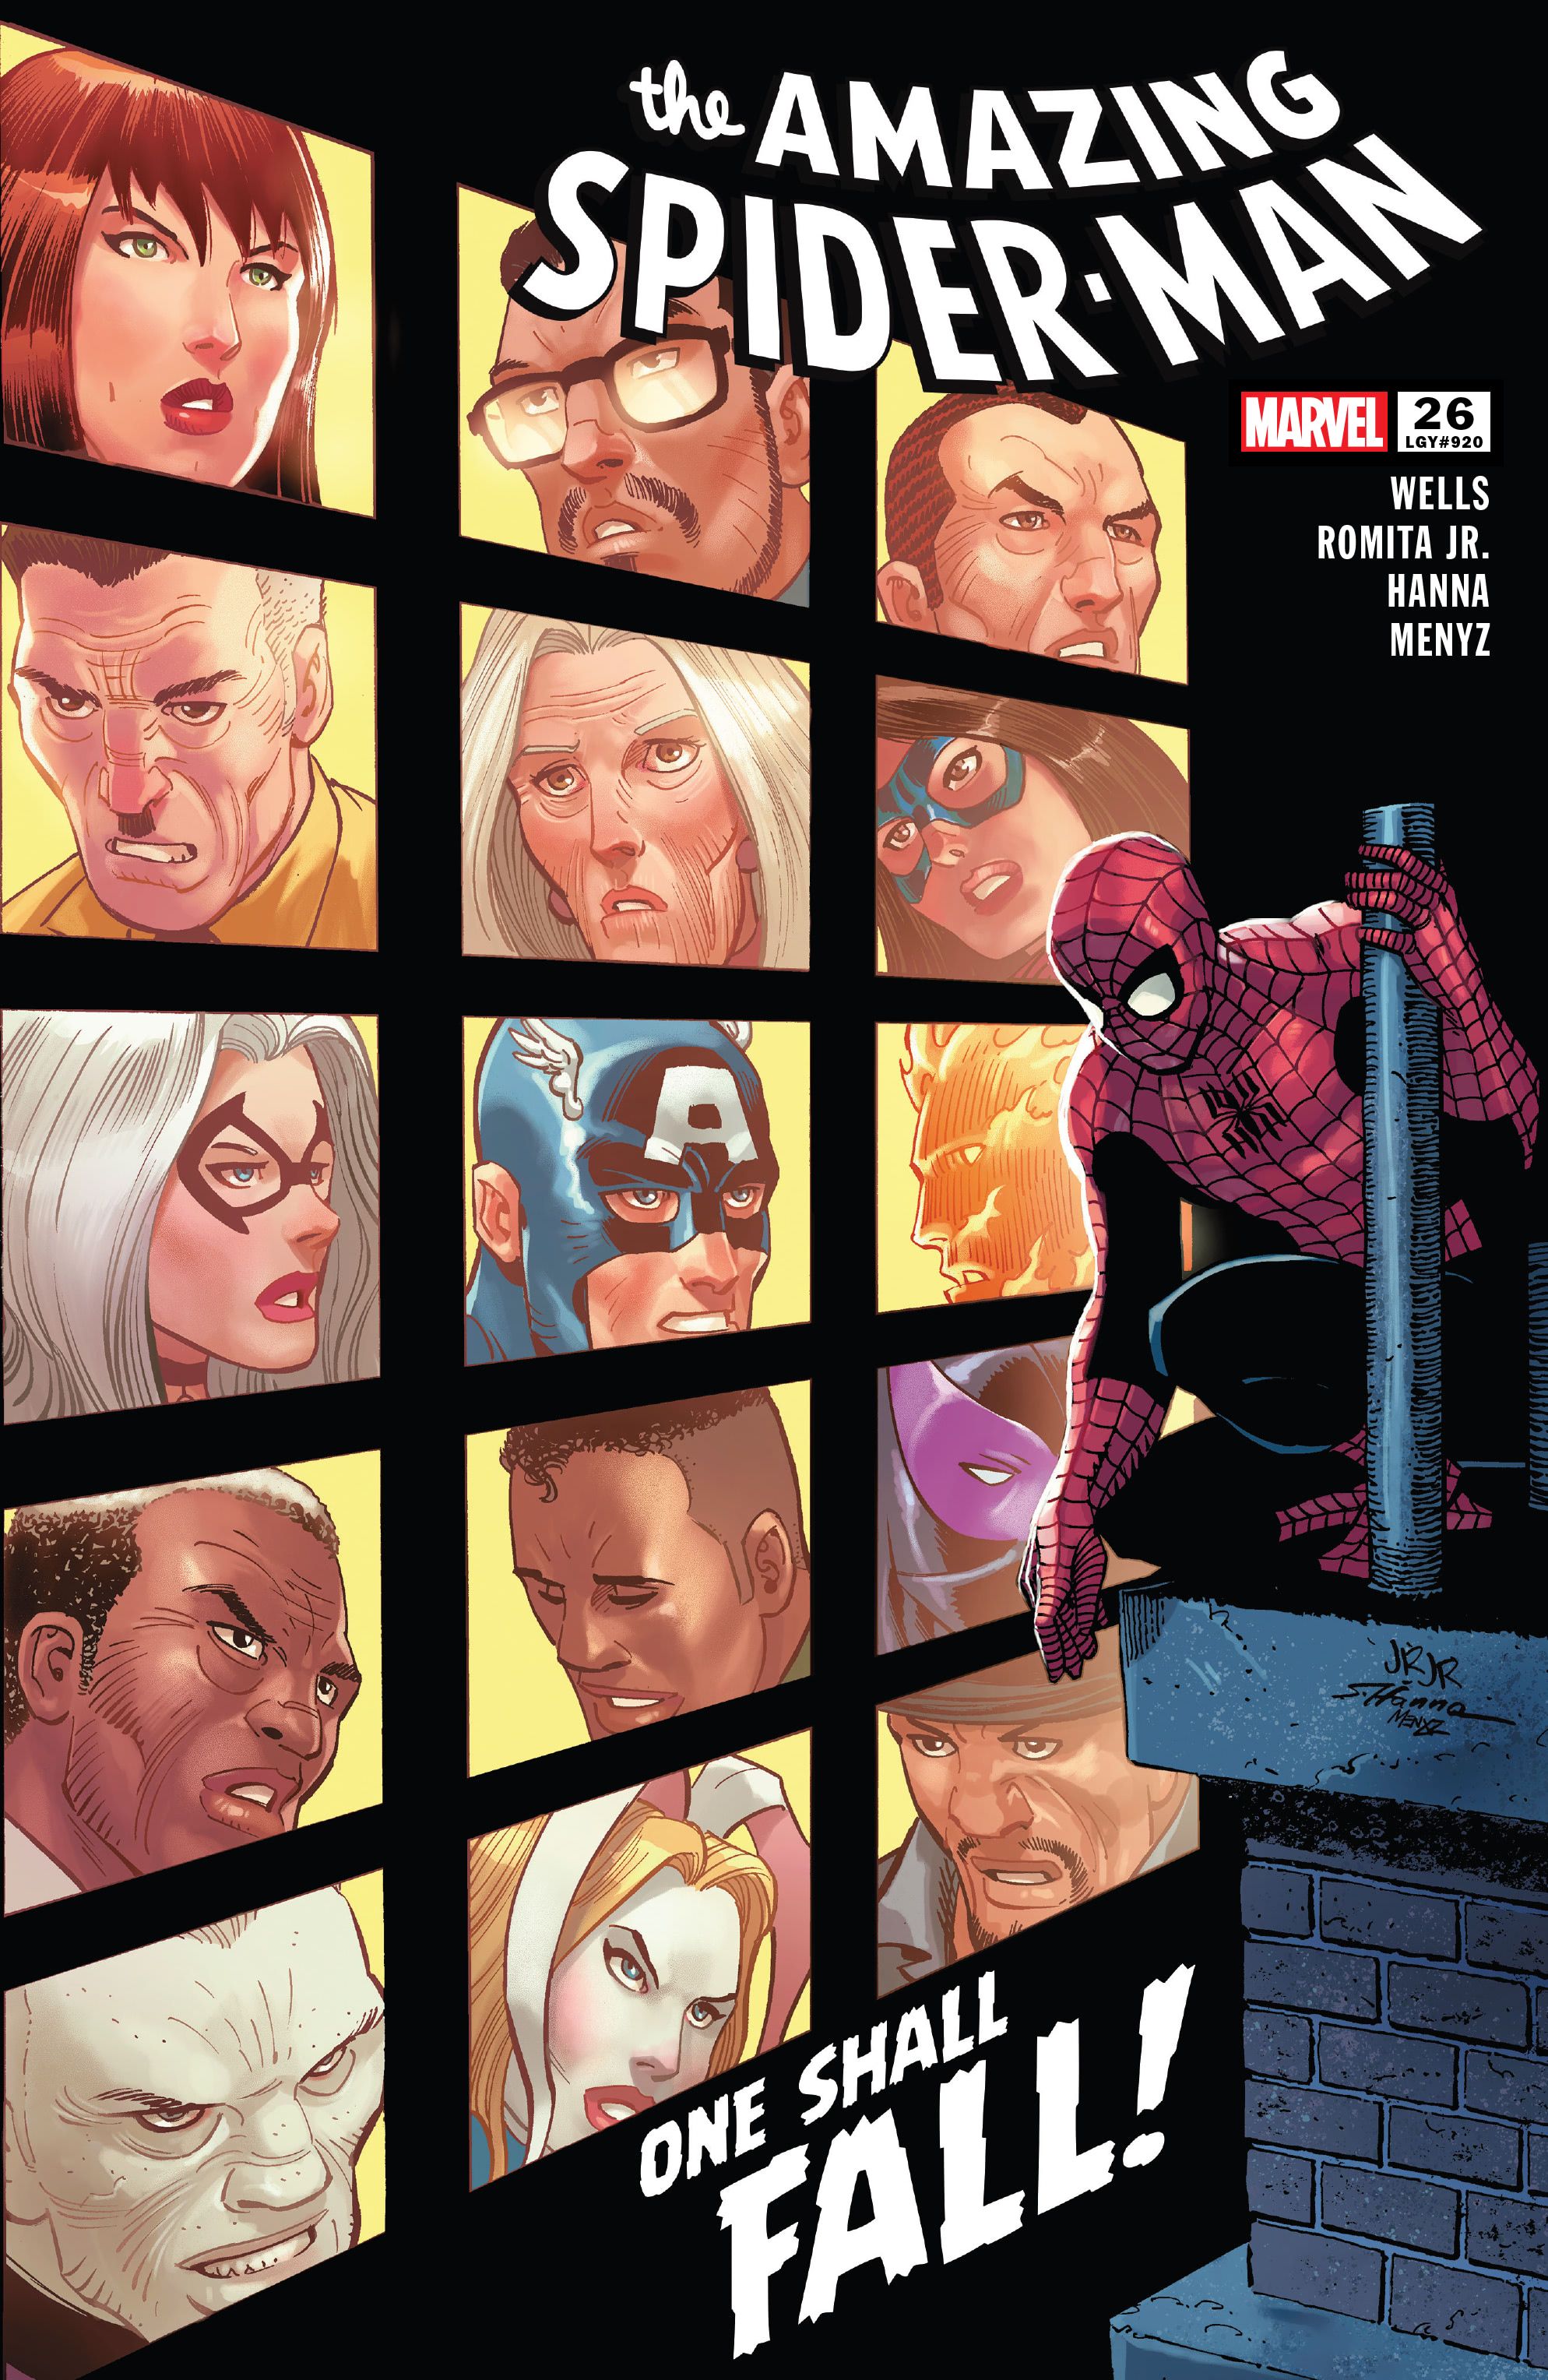 REVIEW: Marvel’s Amazing Spider-Man #26 Keeps Fans Divided With a Shocking Twist